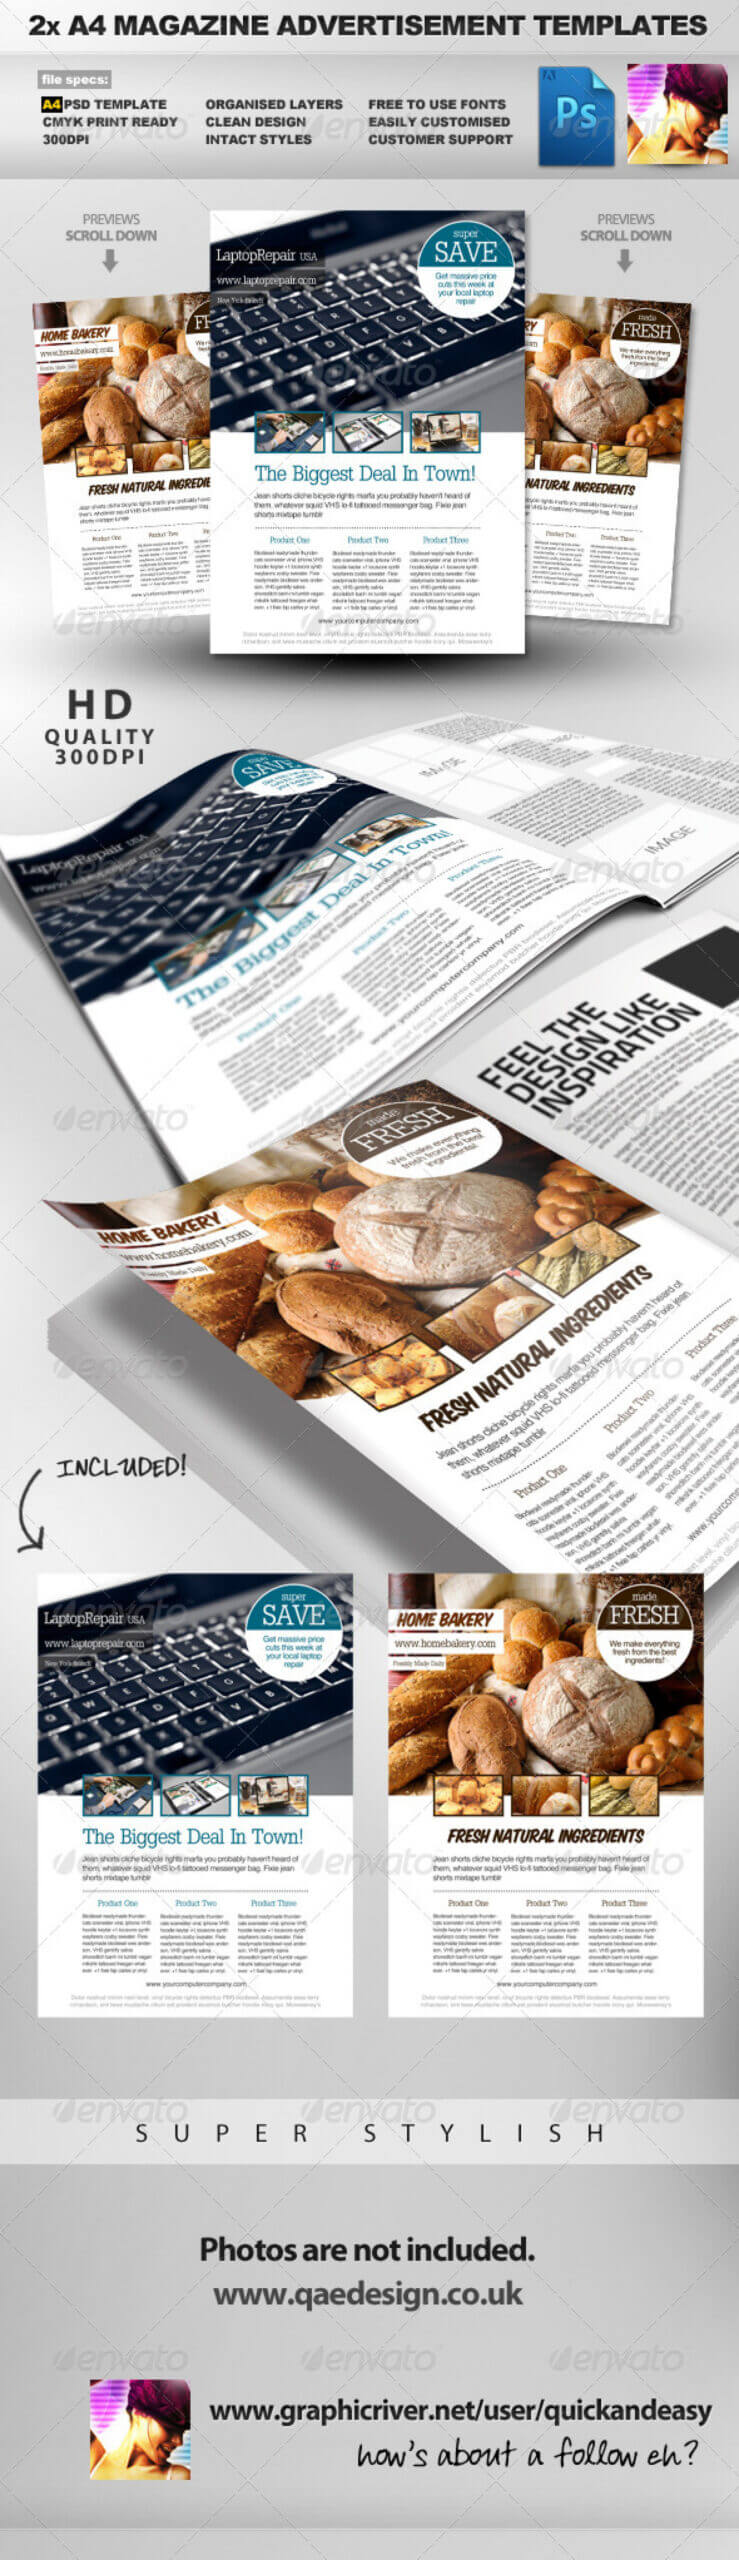 003 D7Henvd Within Magazine Ad Template Word